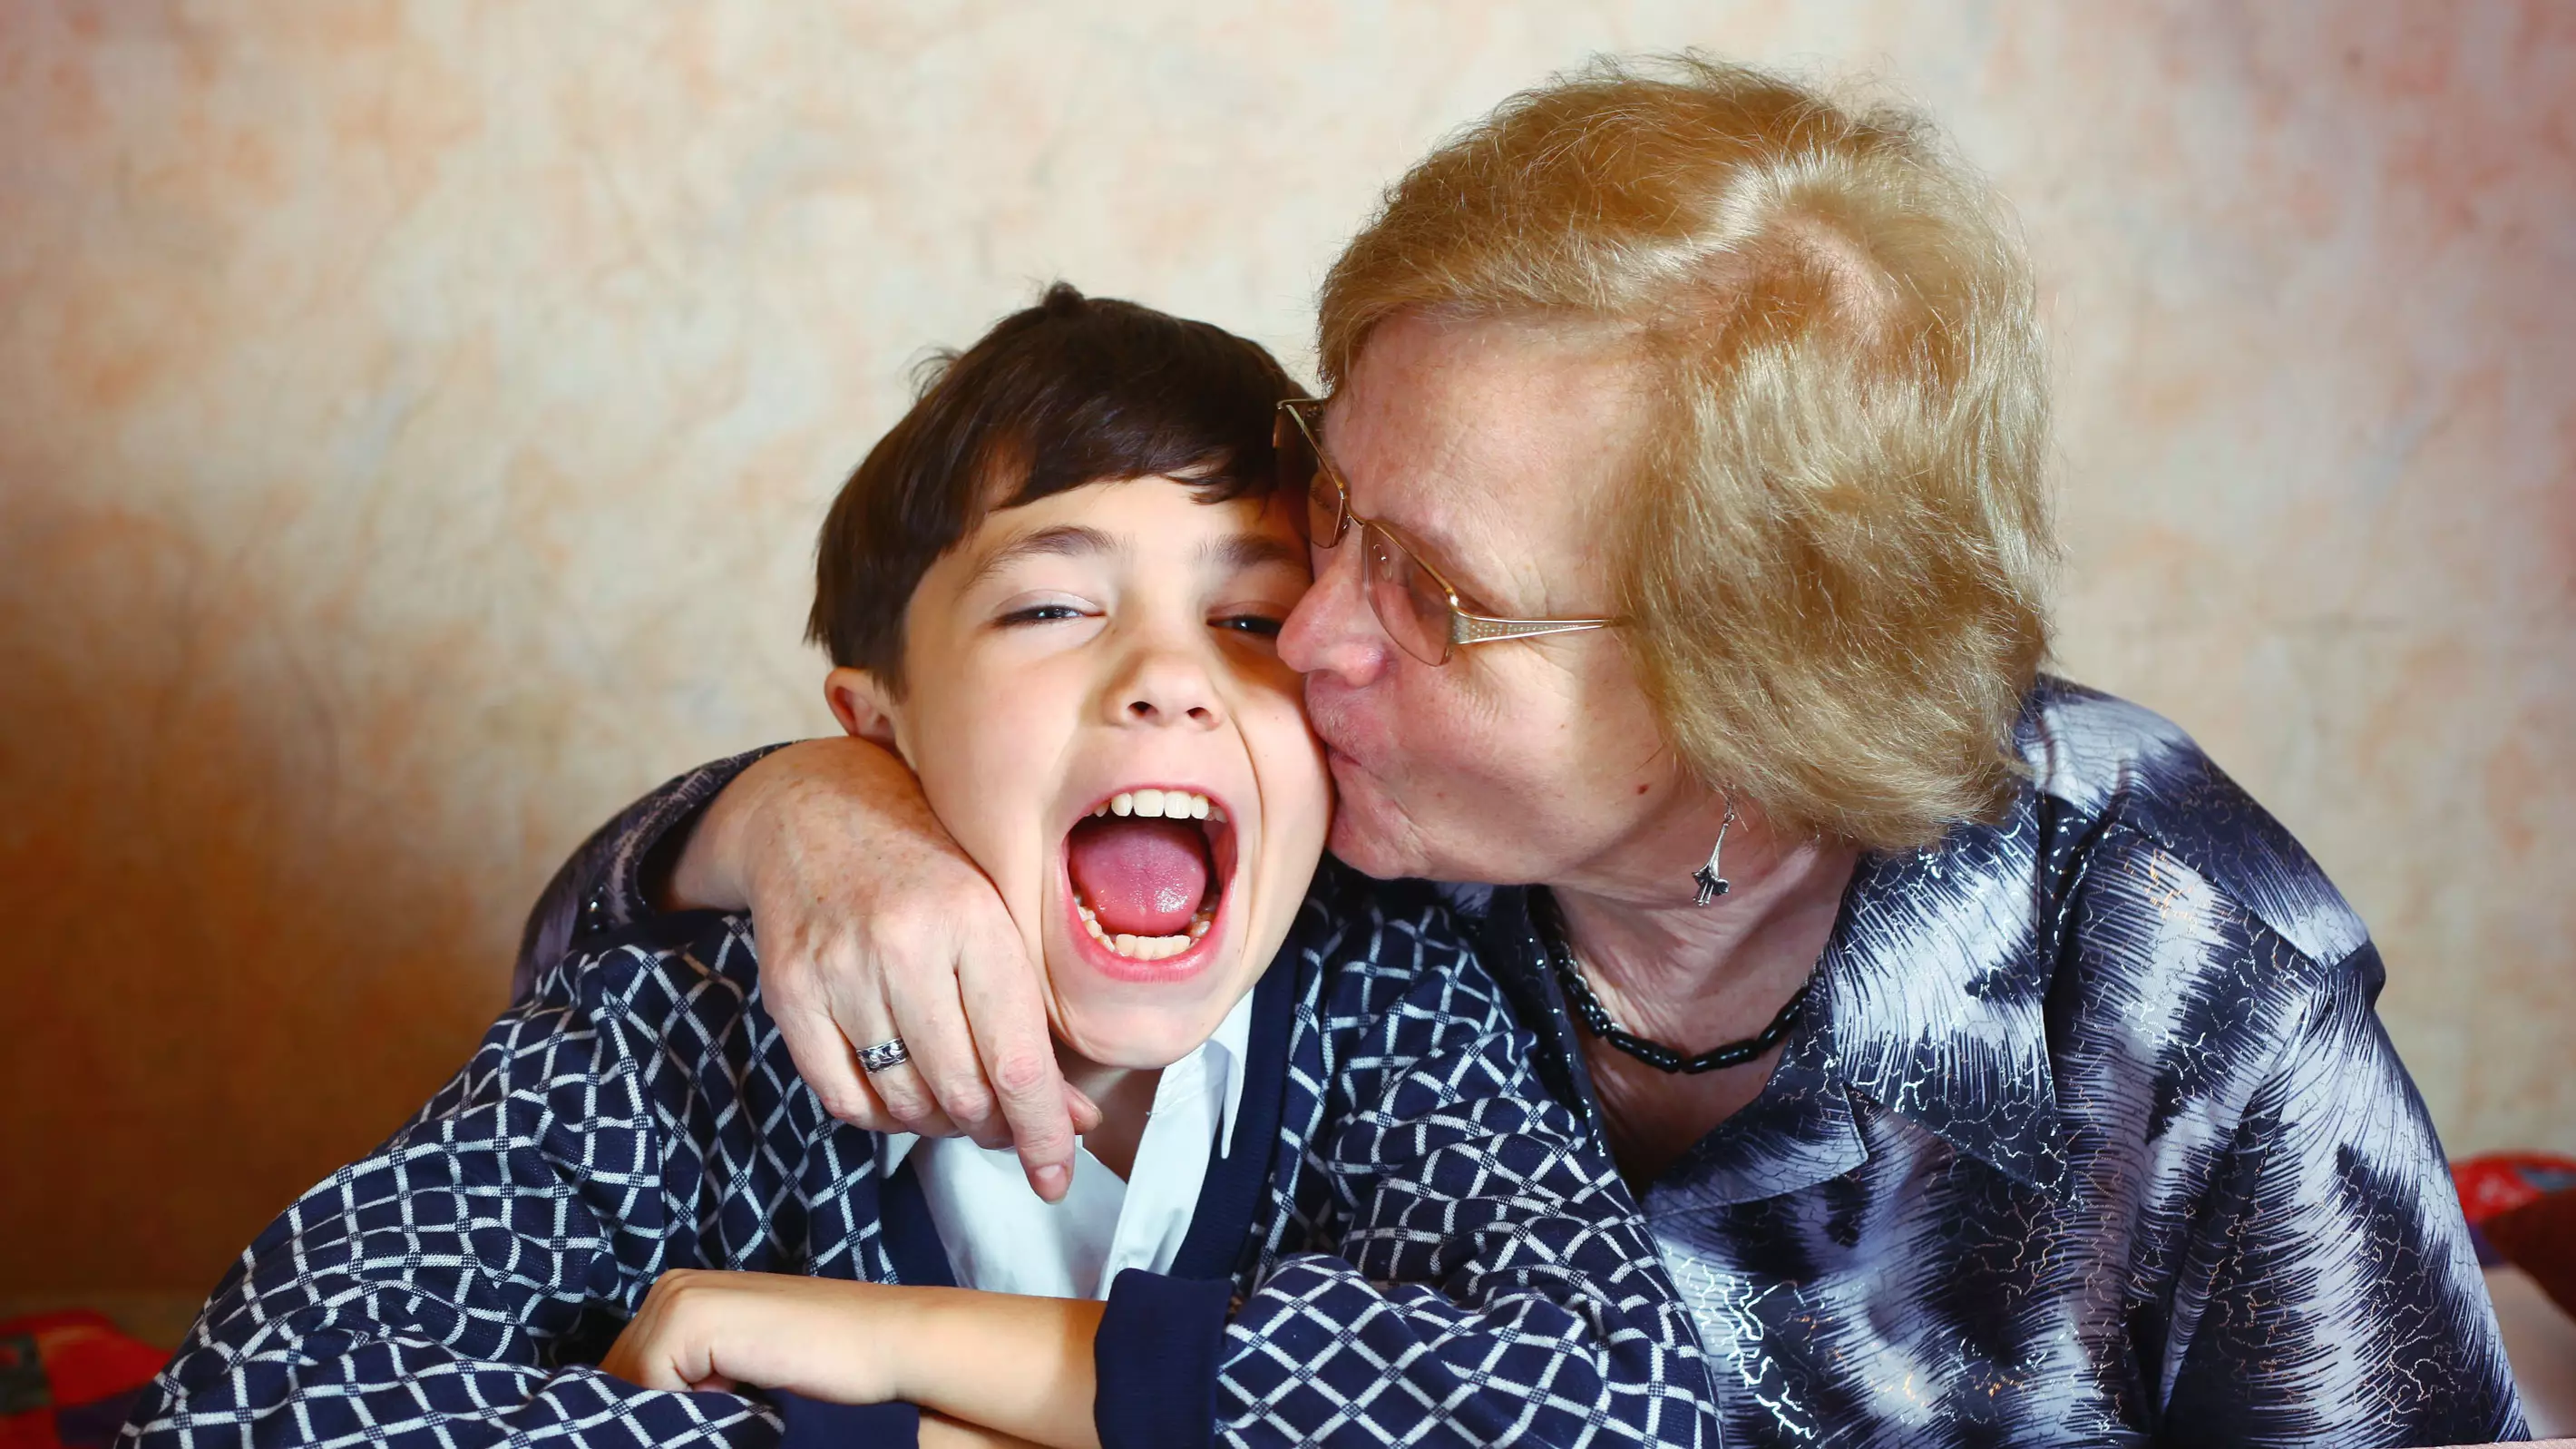 Aussie Schools Are Teaching Kids To Not Kiss Grandparents In Order To Learn About Consent